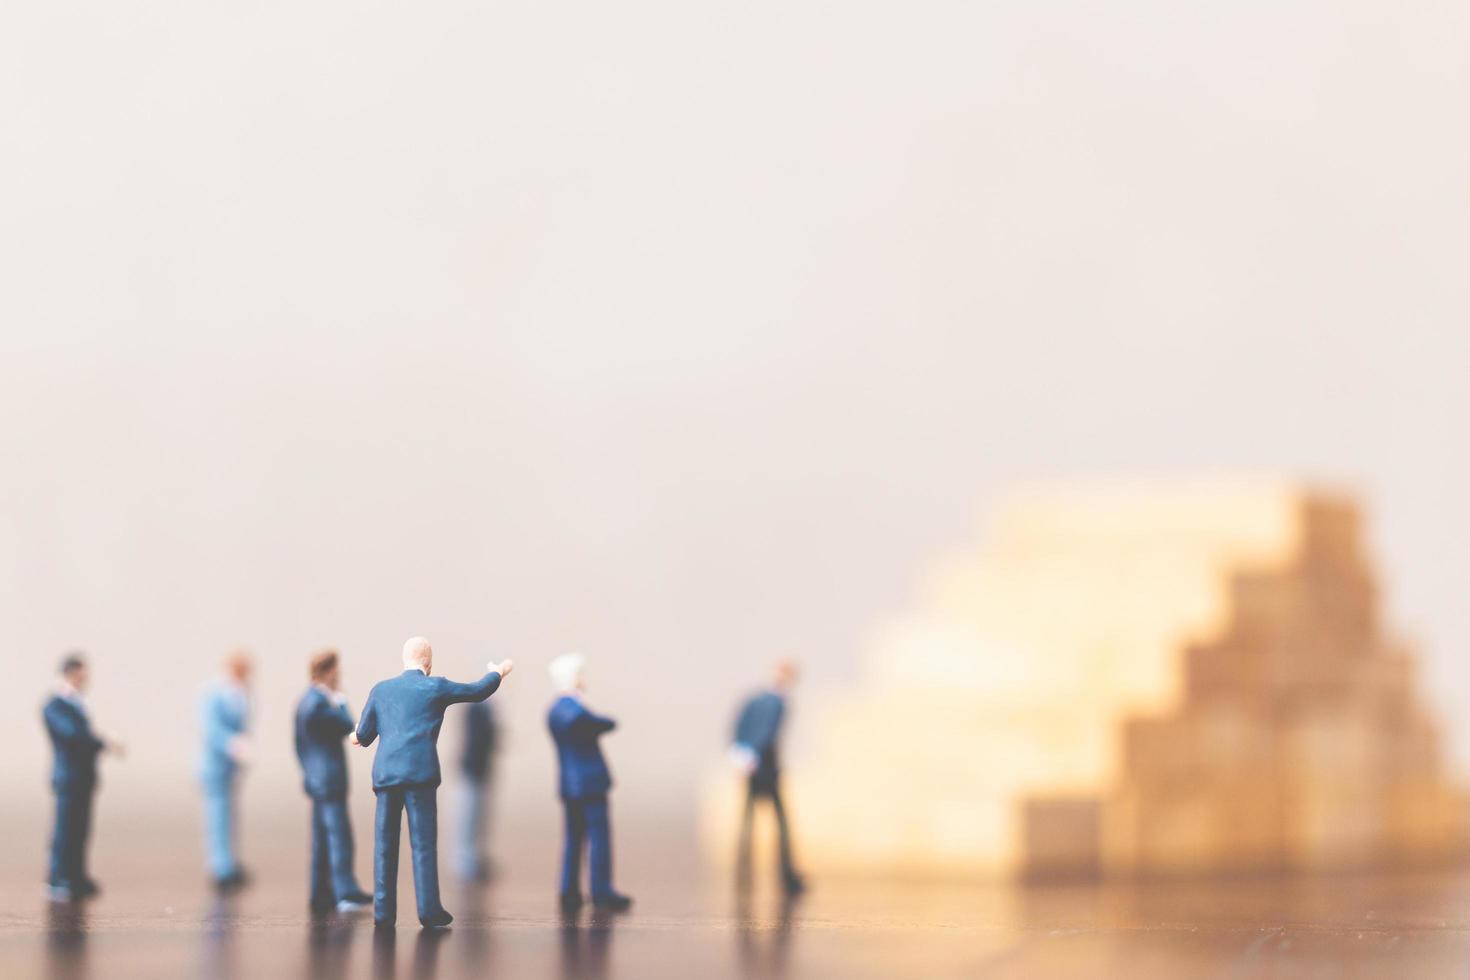 Miniature businessmen standing on a wooden block, successful business leader and teamwork concept photo